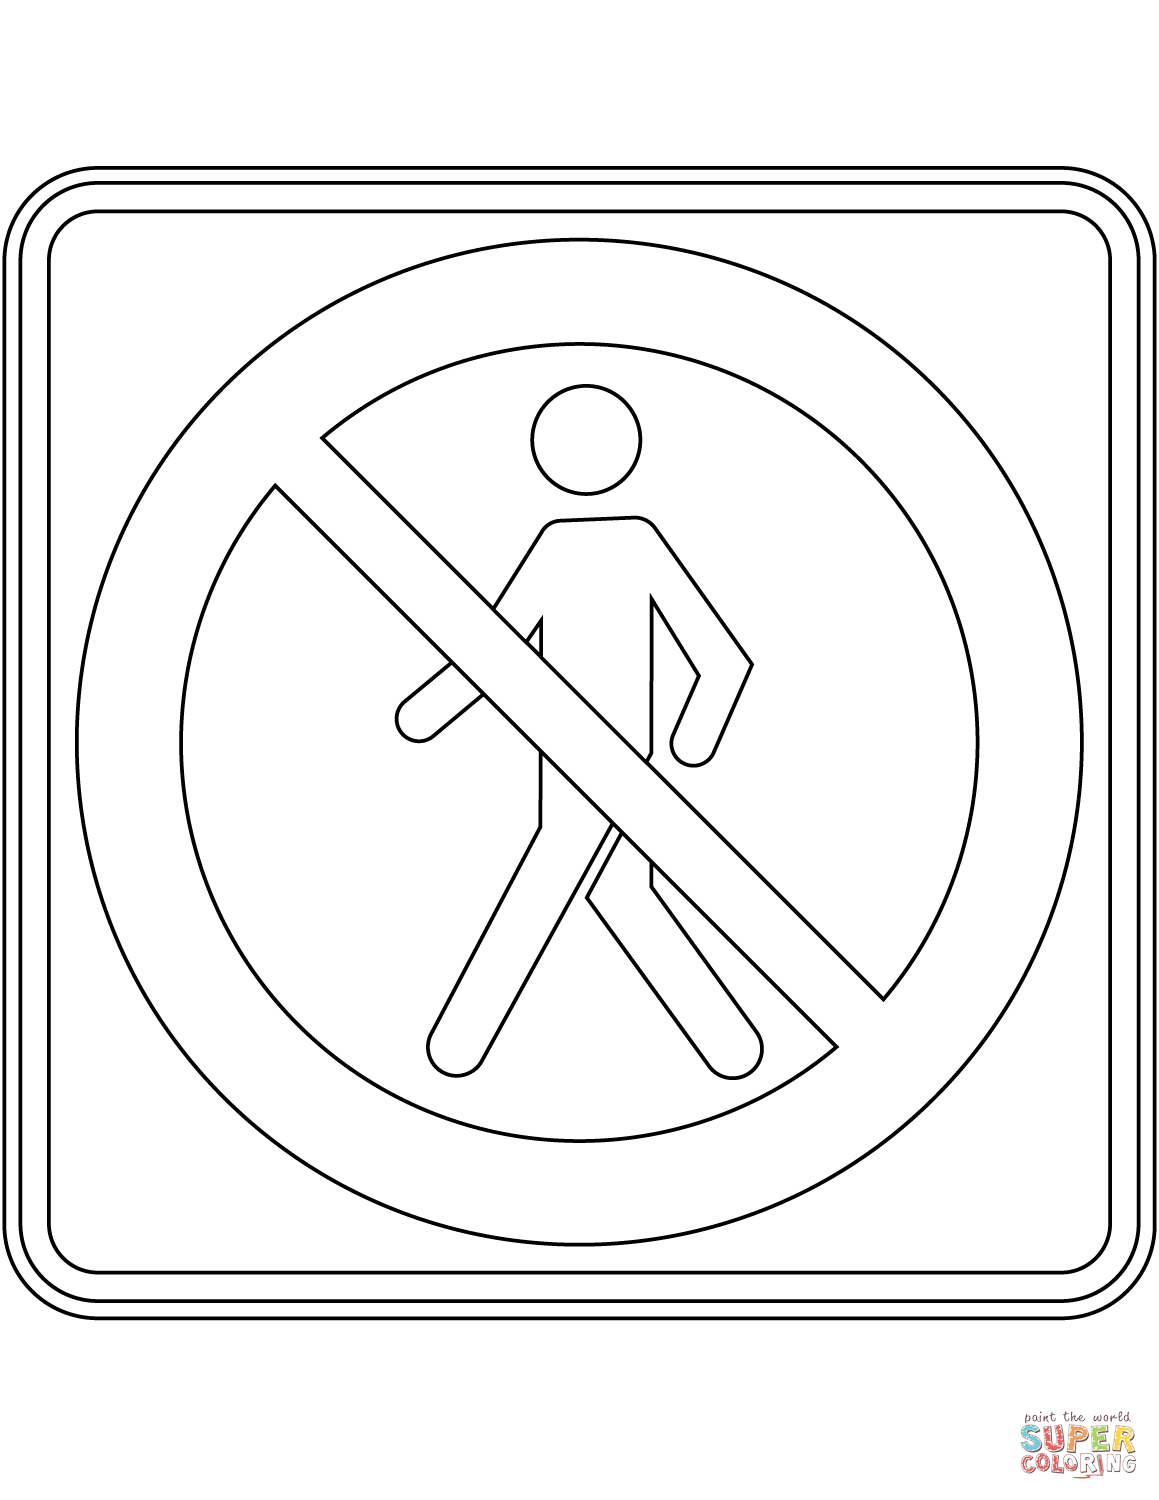 No pedestrian crossing sign in quebec coloring page free printable coloring pages